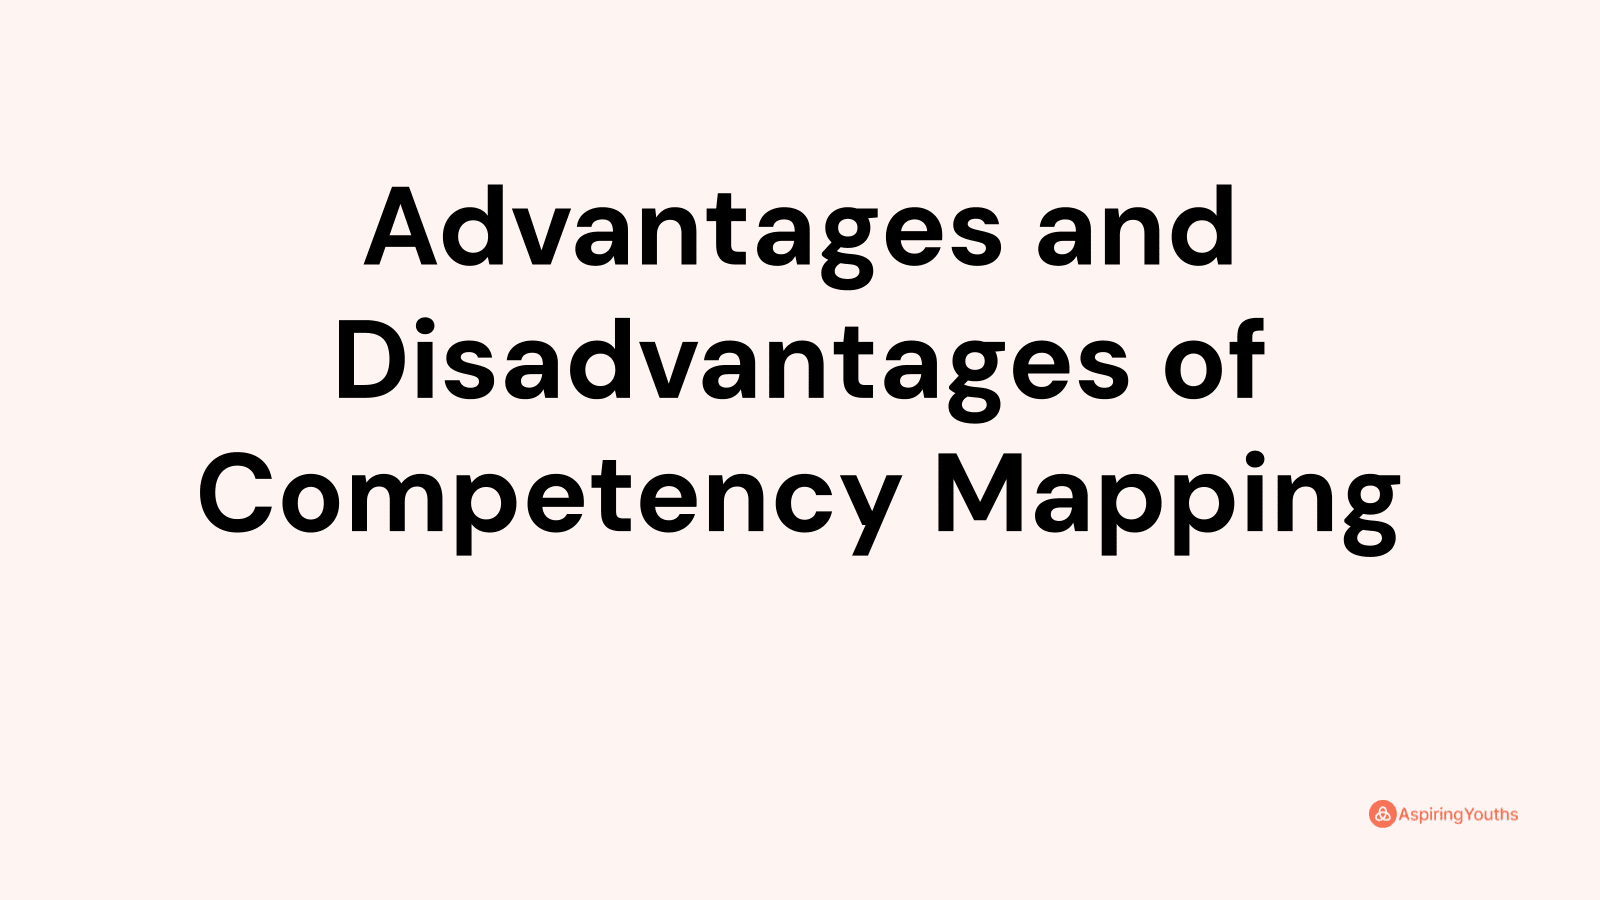 Advantages and disadvantages of Competency Mapping